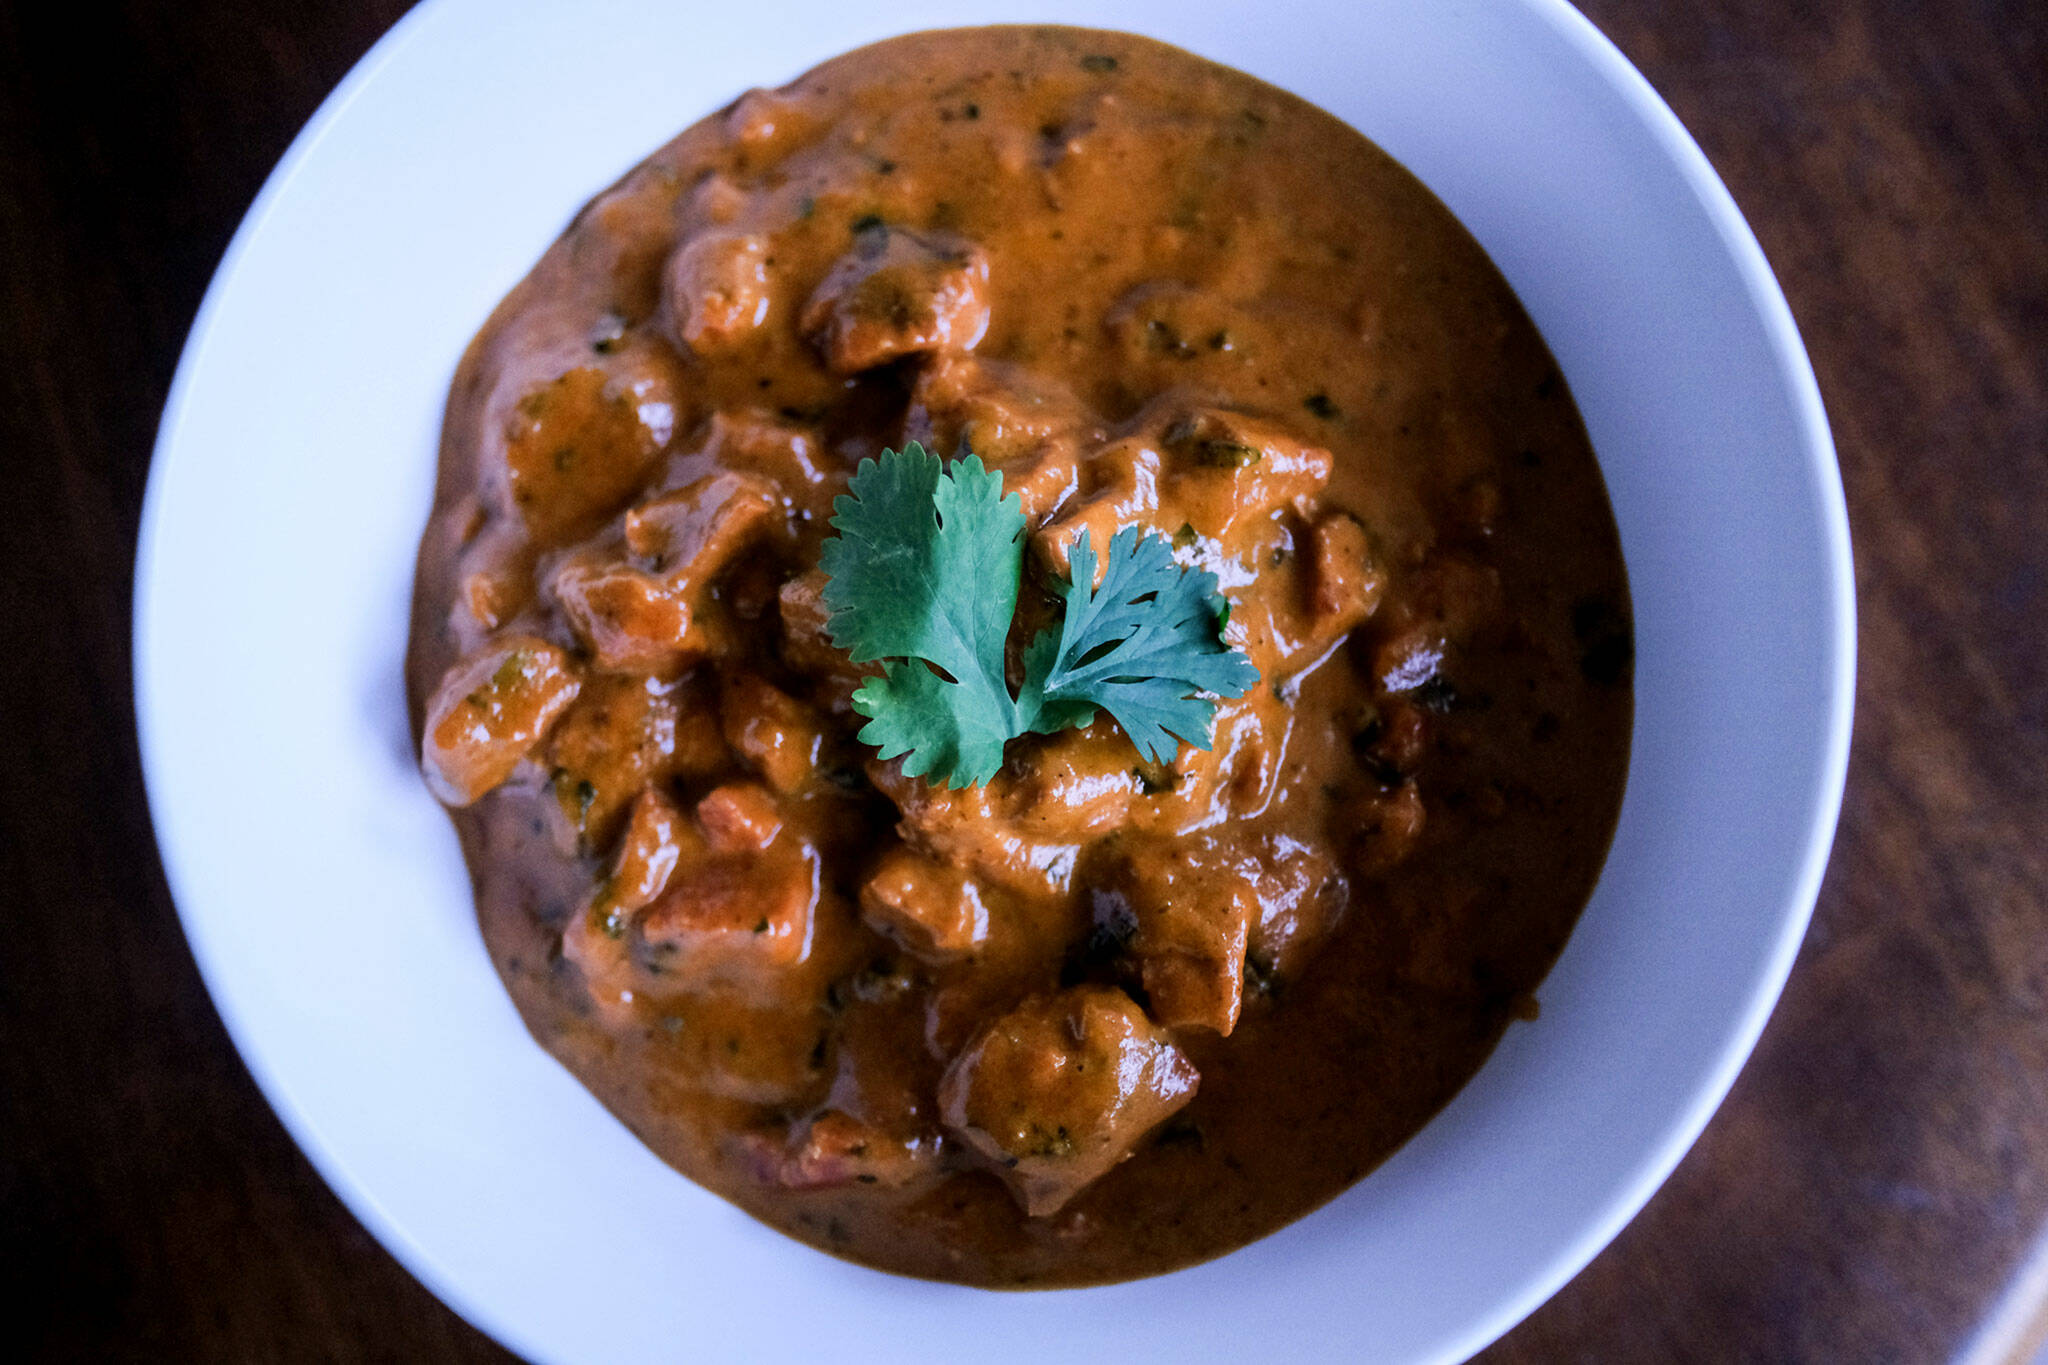 The butter chicken at 5 Rivers Indian Cuisine in Everett is a bestseller. (Taylor Goebel / The Herald)